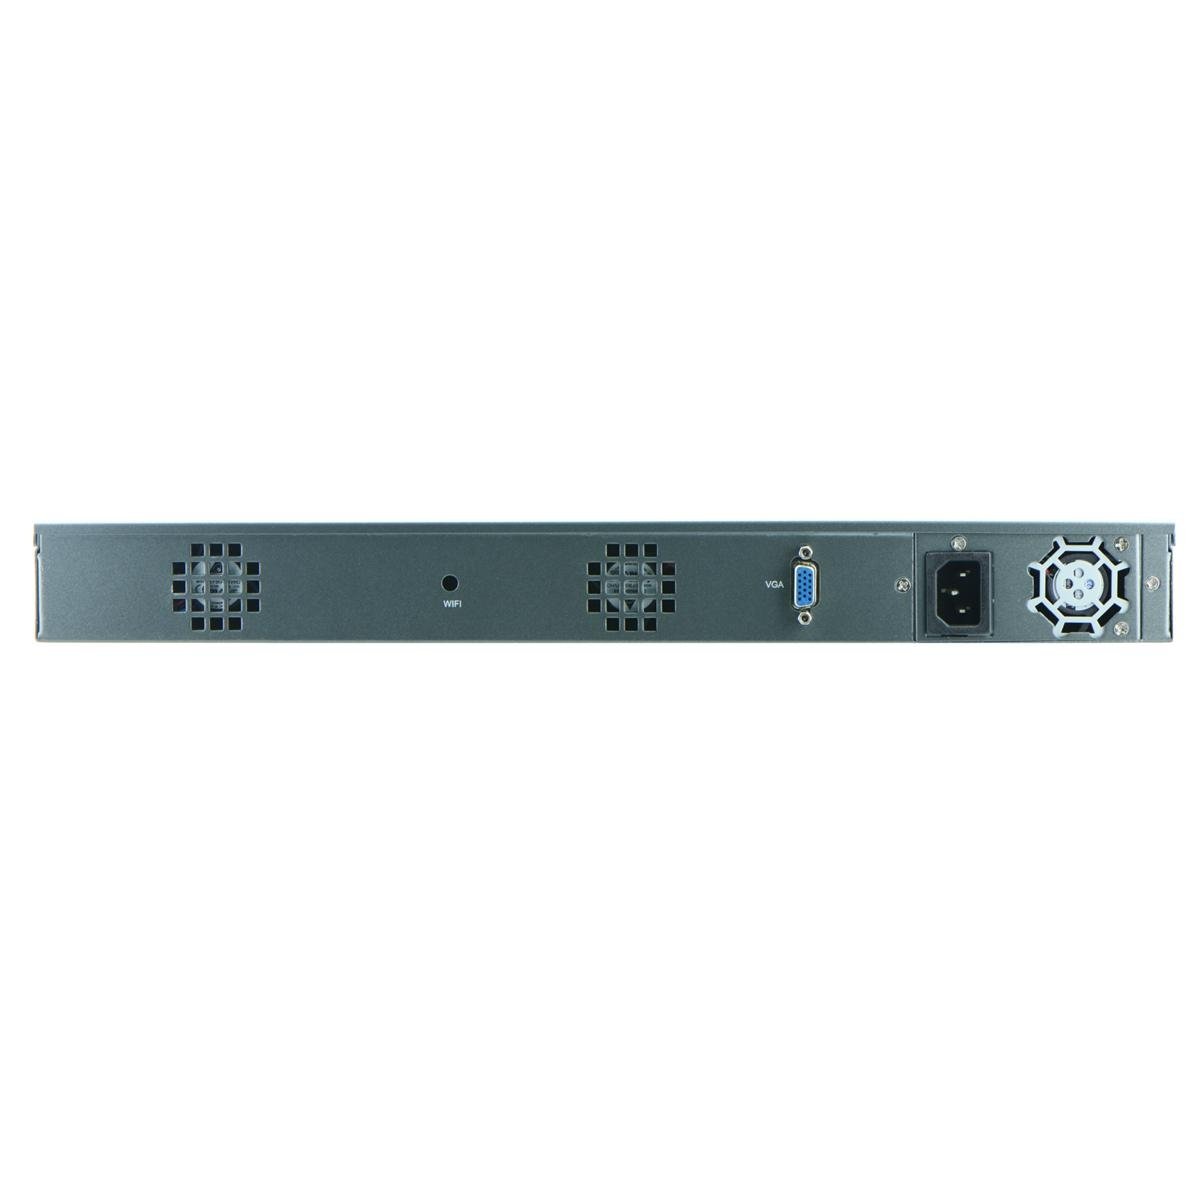 Intel H67 1U Industrial Rackmount Barebone for Network Security with 6Nic, 2SFP  3